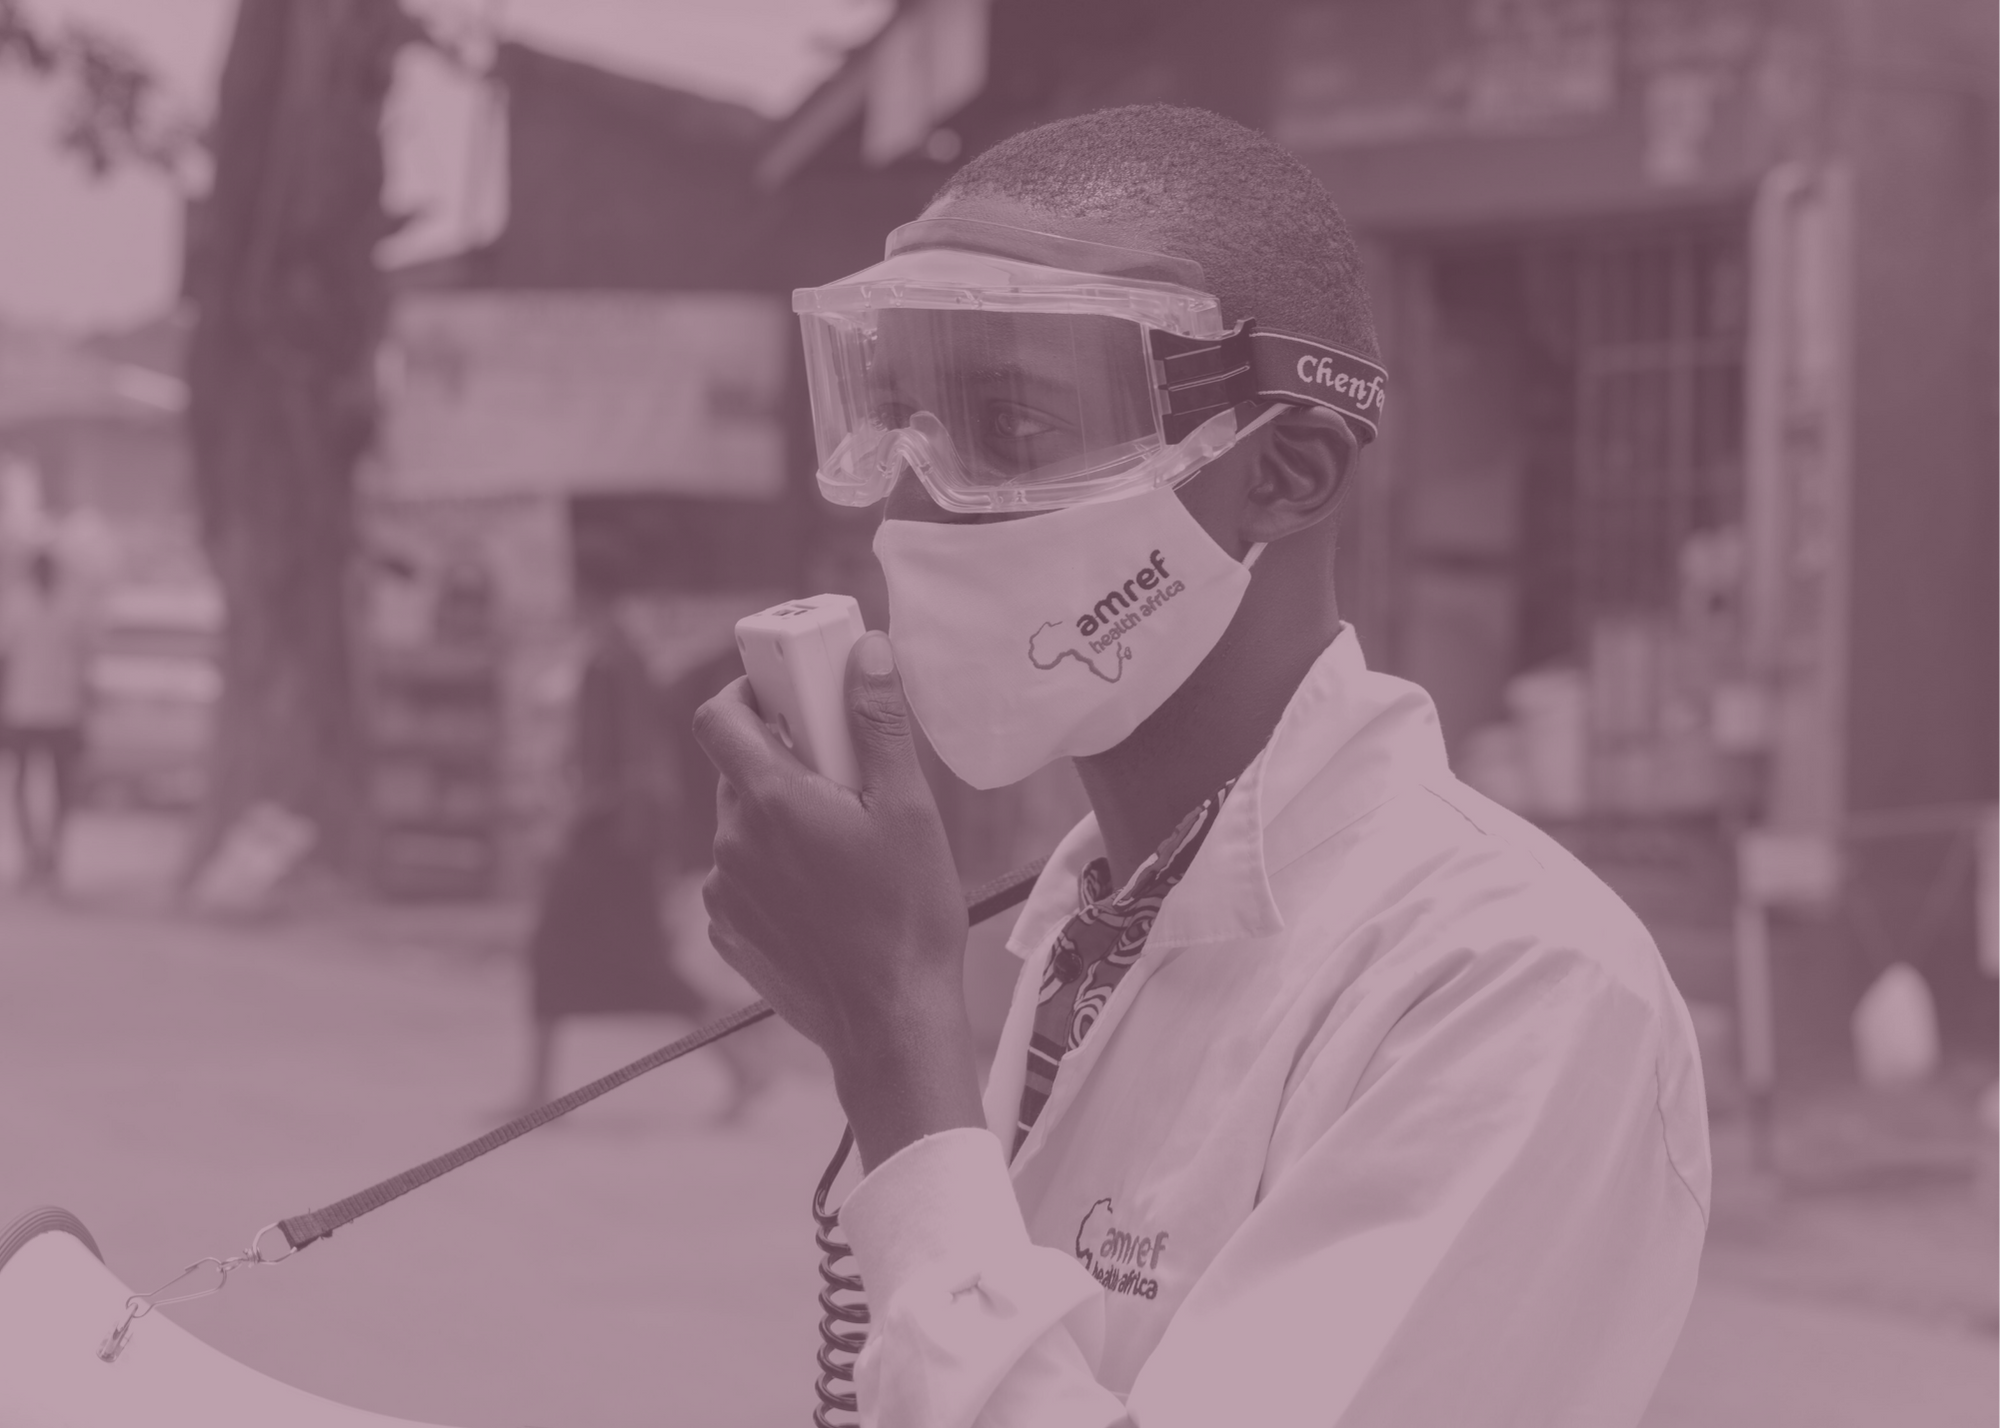 An Amref Healthworker with PPE speaking into a walkie talkie communicator.